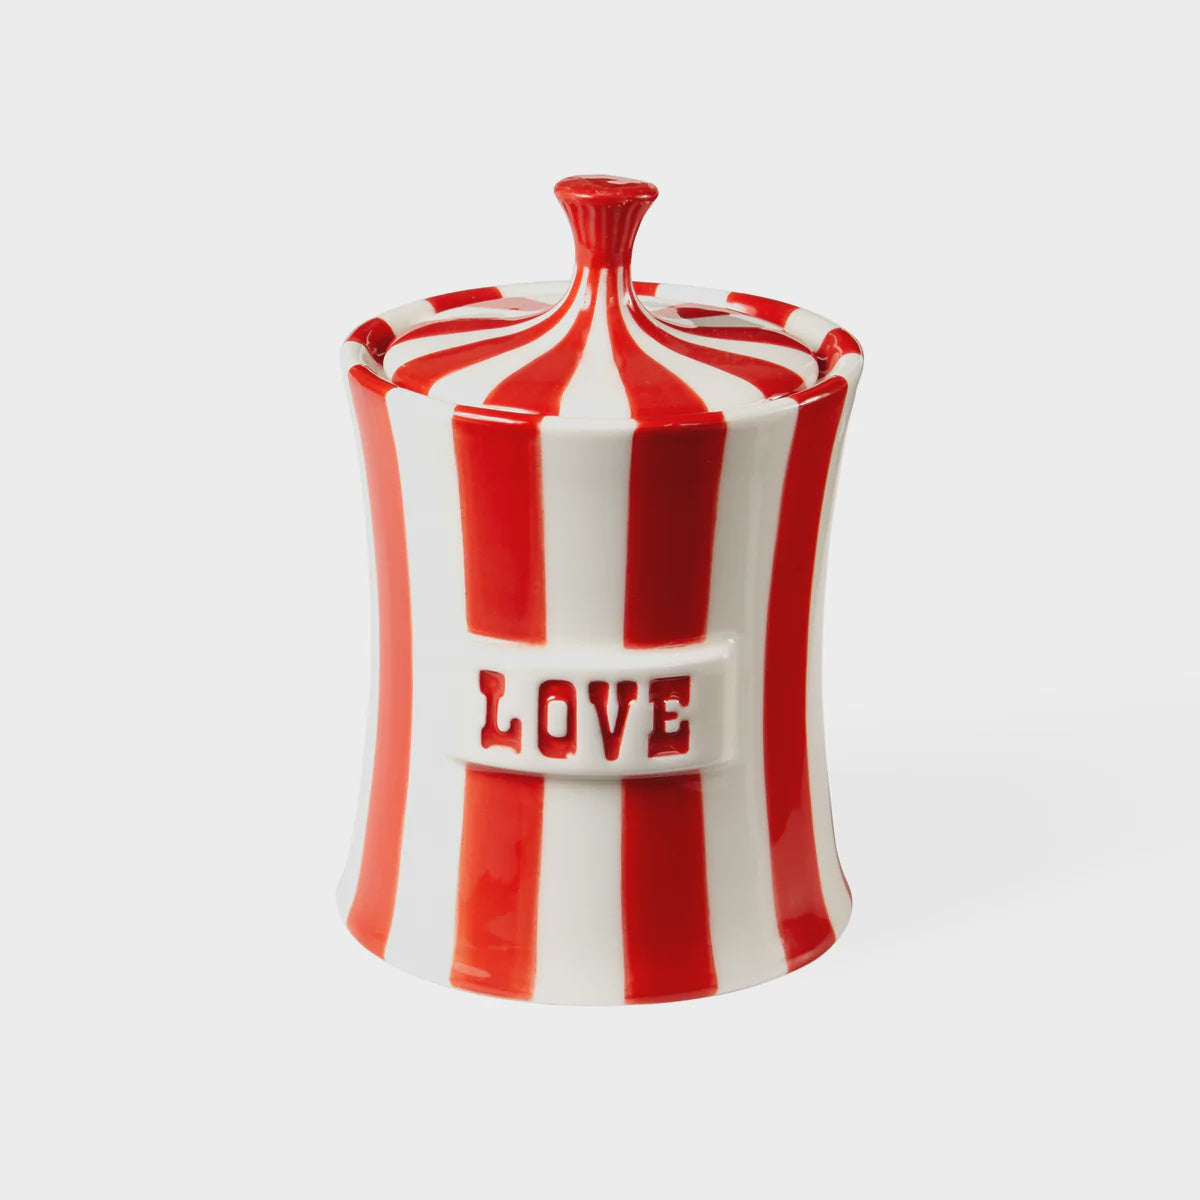 Jonathan Adler Vice Candle Love Red